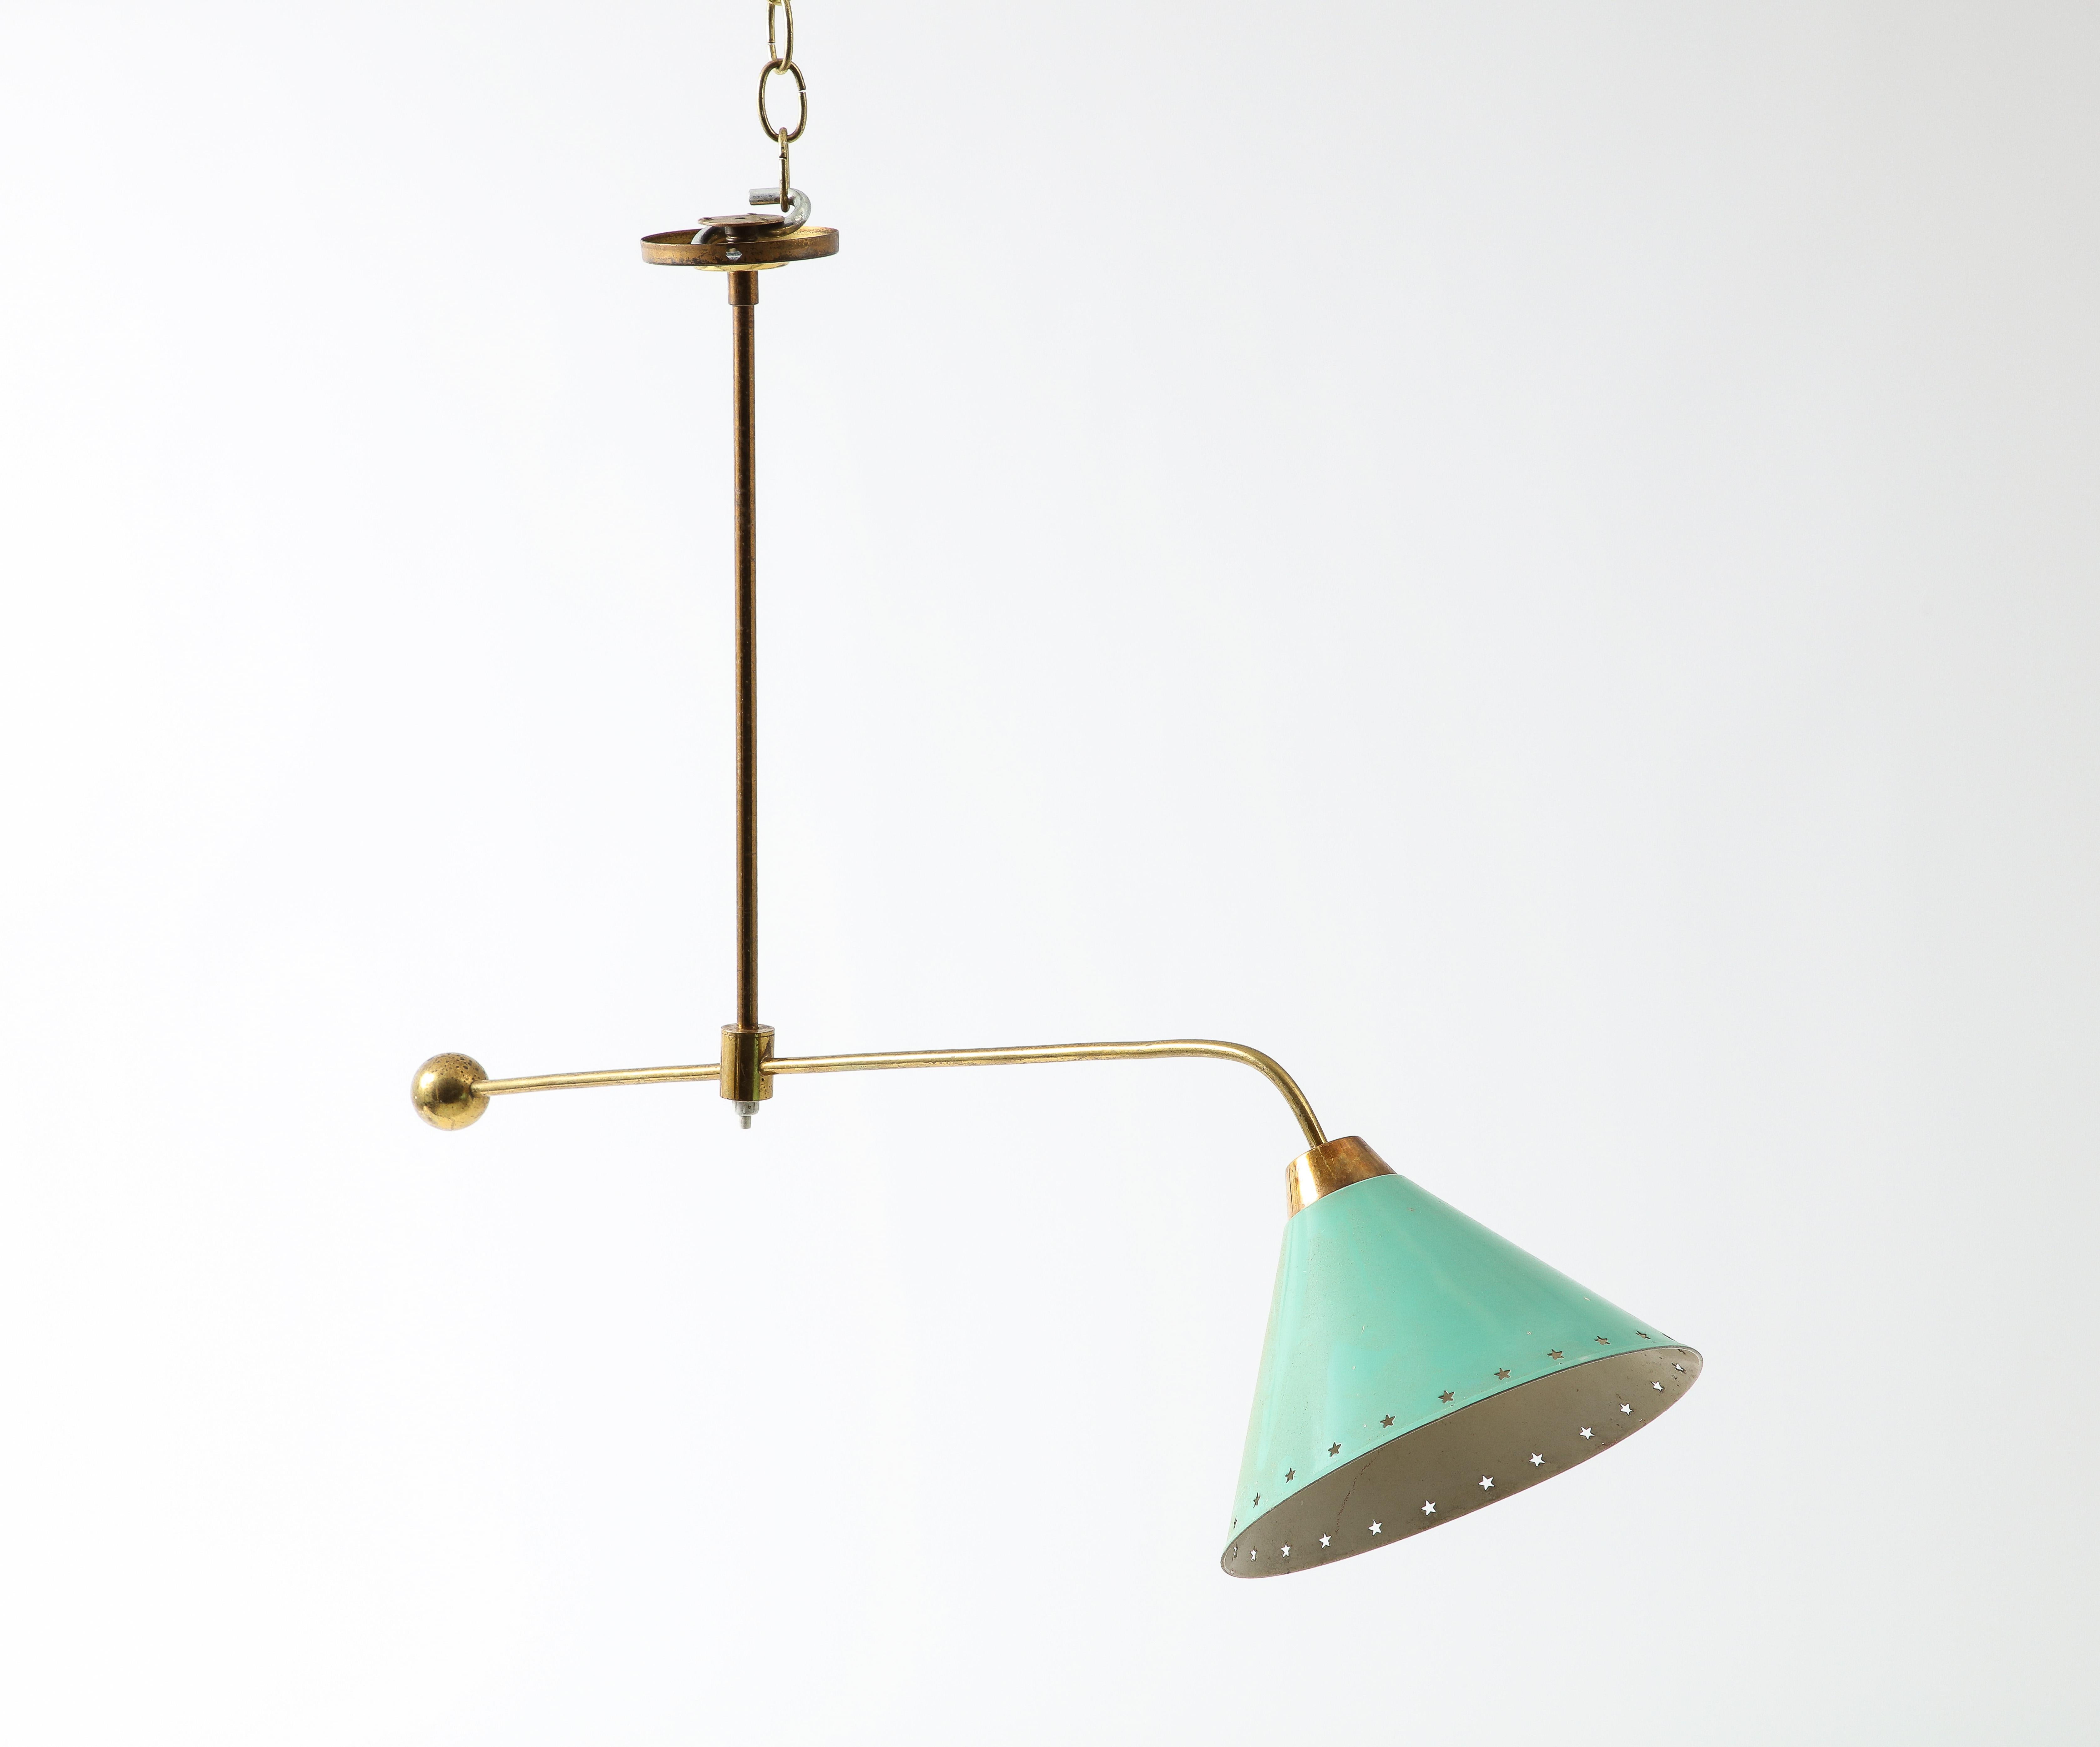 Arlus Brass Asymmetrical Ceiling Fixture with Green Shade, France 1960's For Sale 1